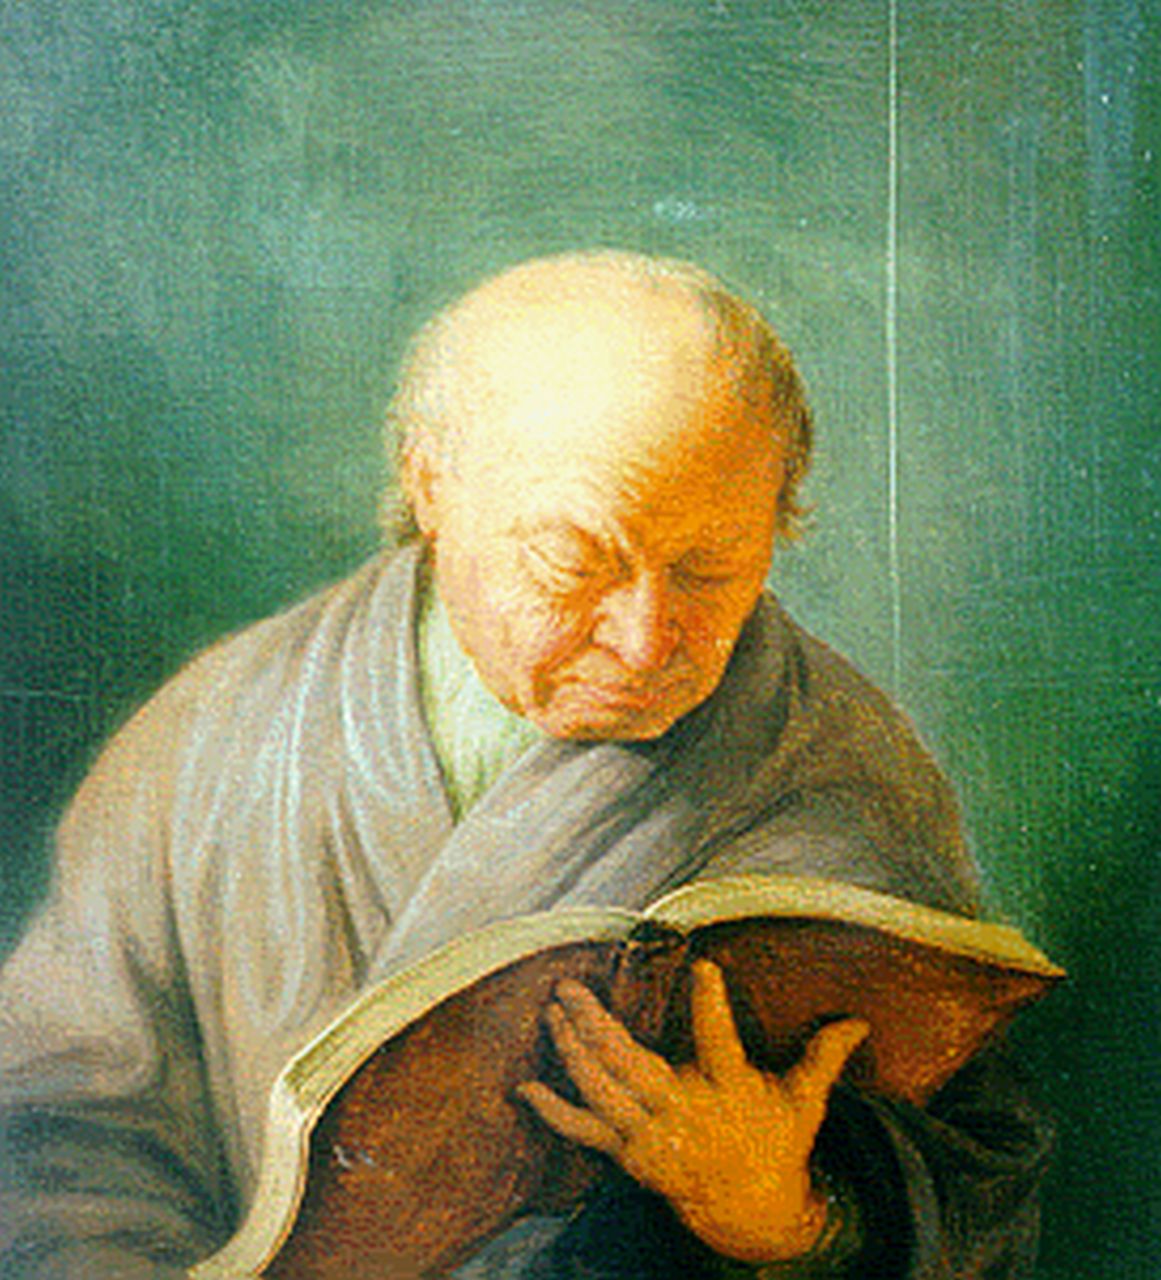 Frans Mieris de Jonge | Elderly man with a book, oil on panel, 18.2 x 16.8 cm, signed on the reverse and dated 1740